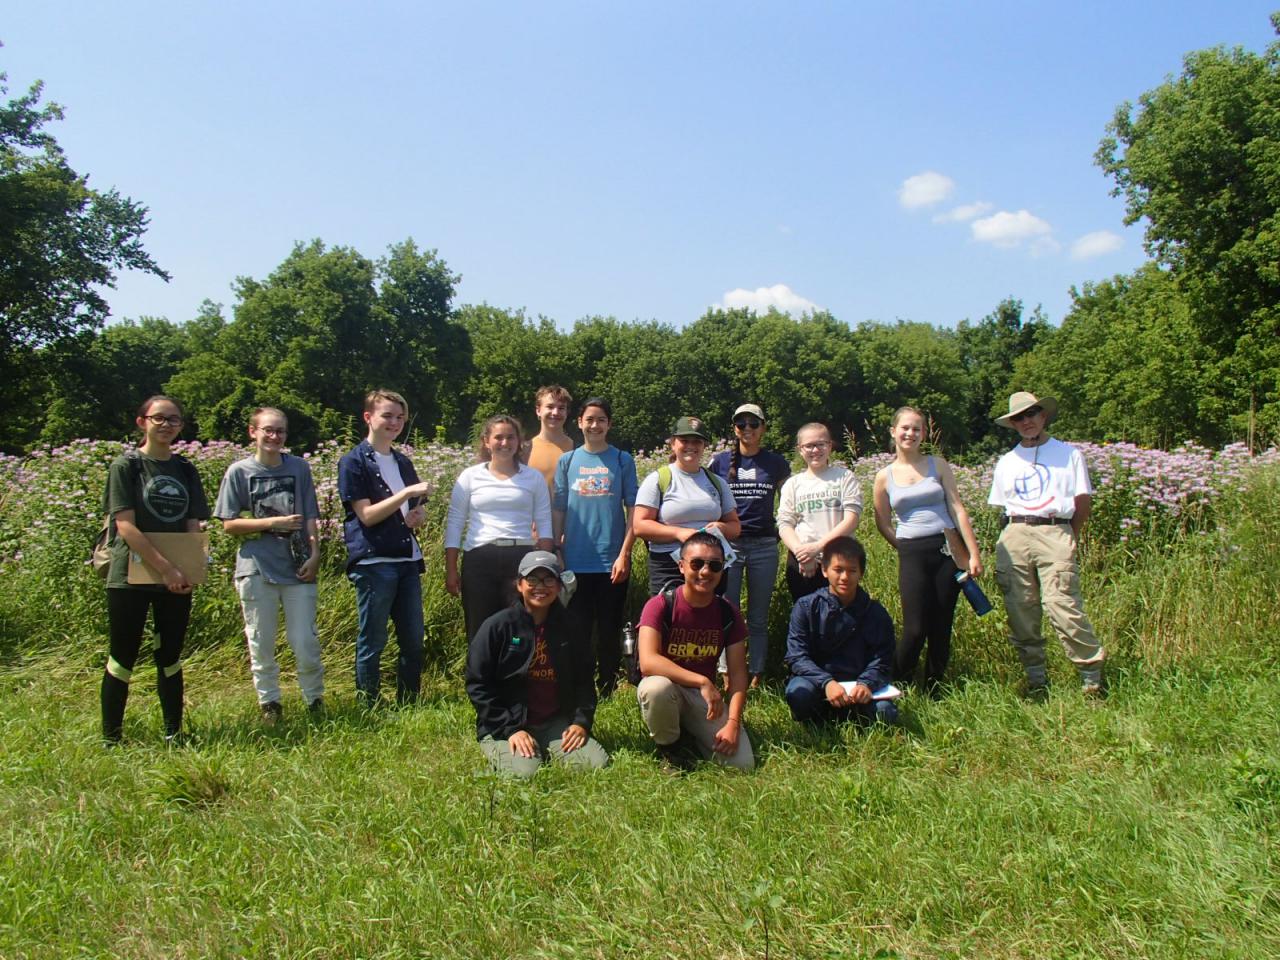 Youth Empowerment Program students and the National Park Service Fellows gather in a group at Vermilion Linear Park.